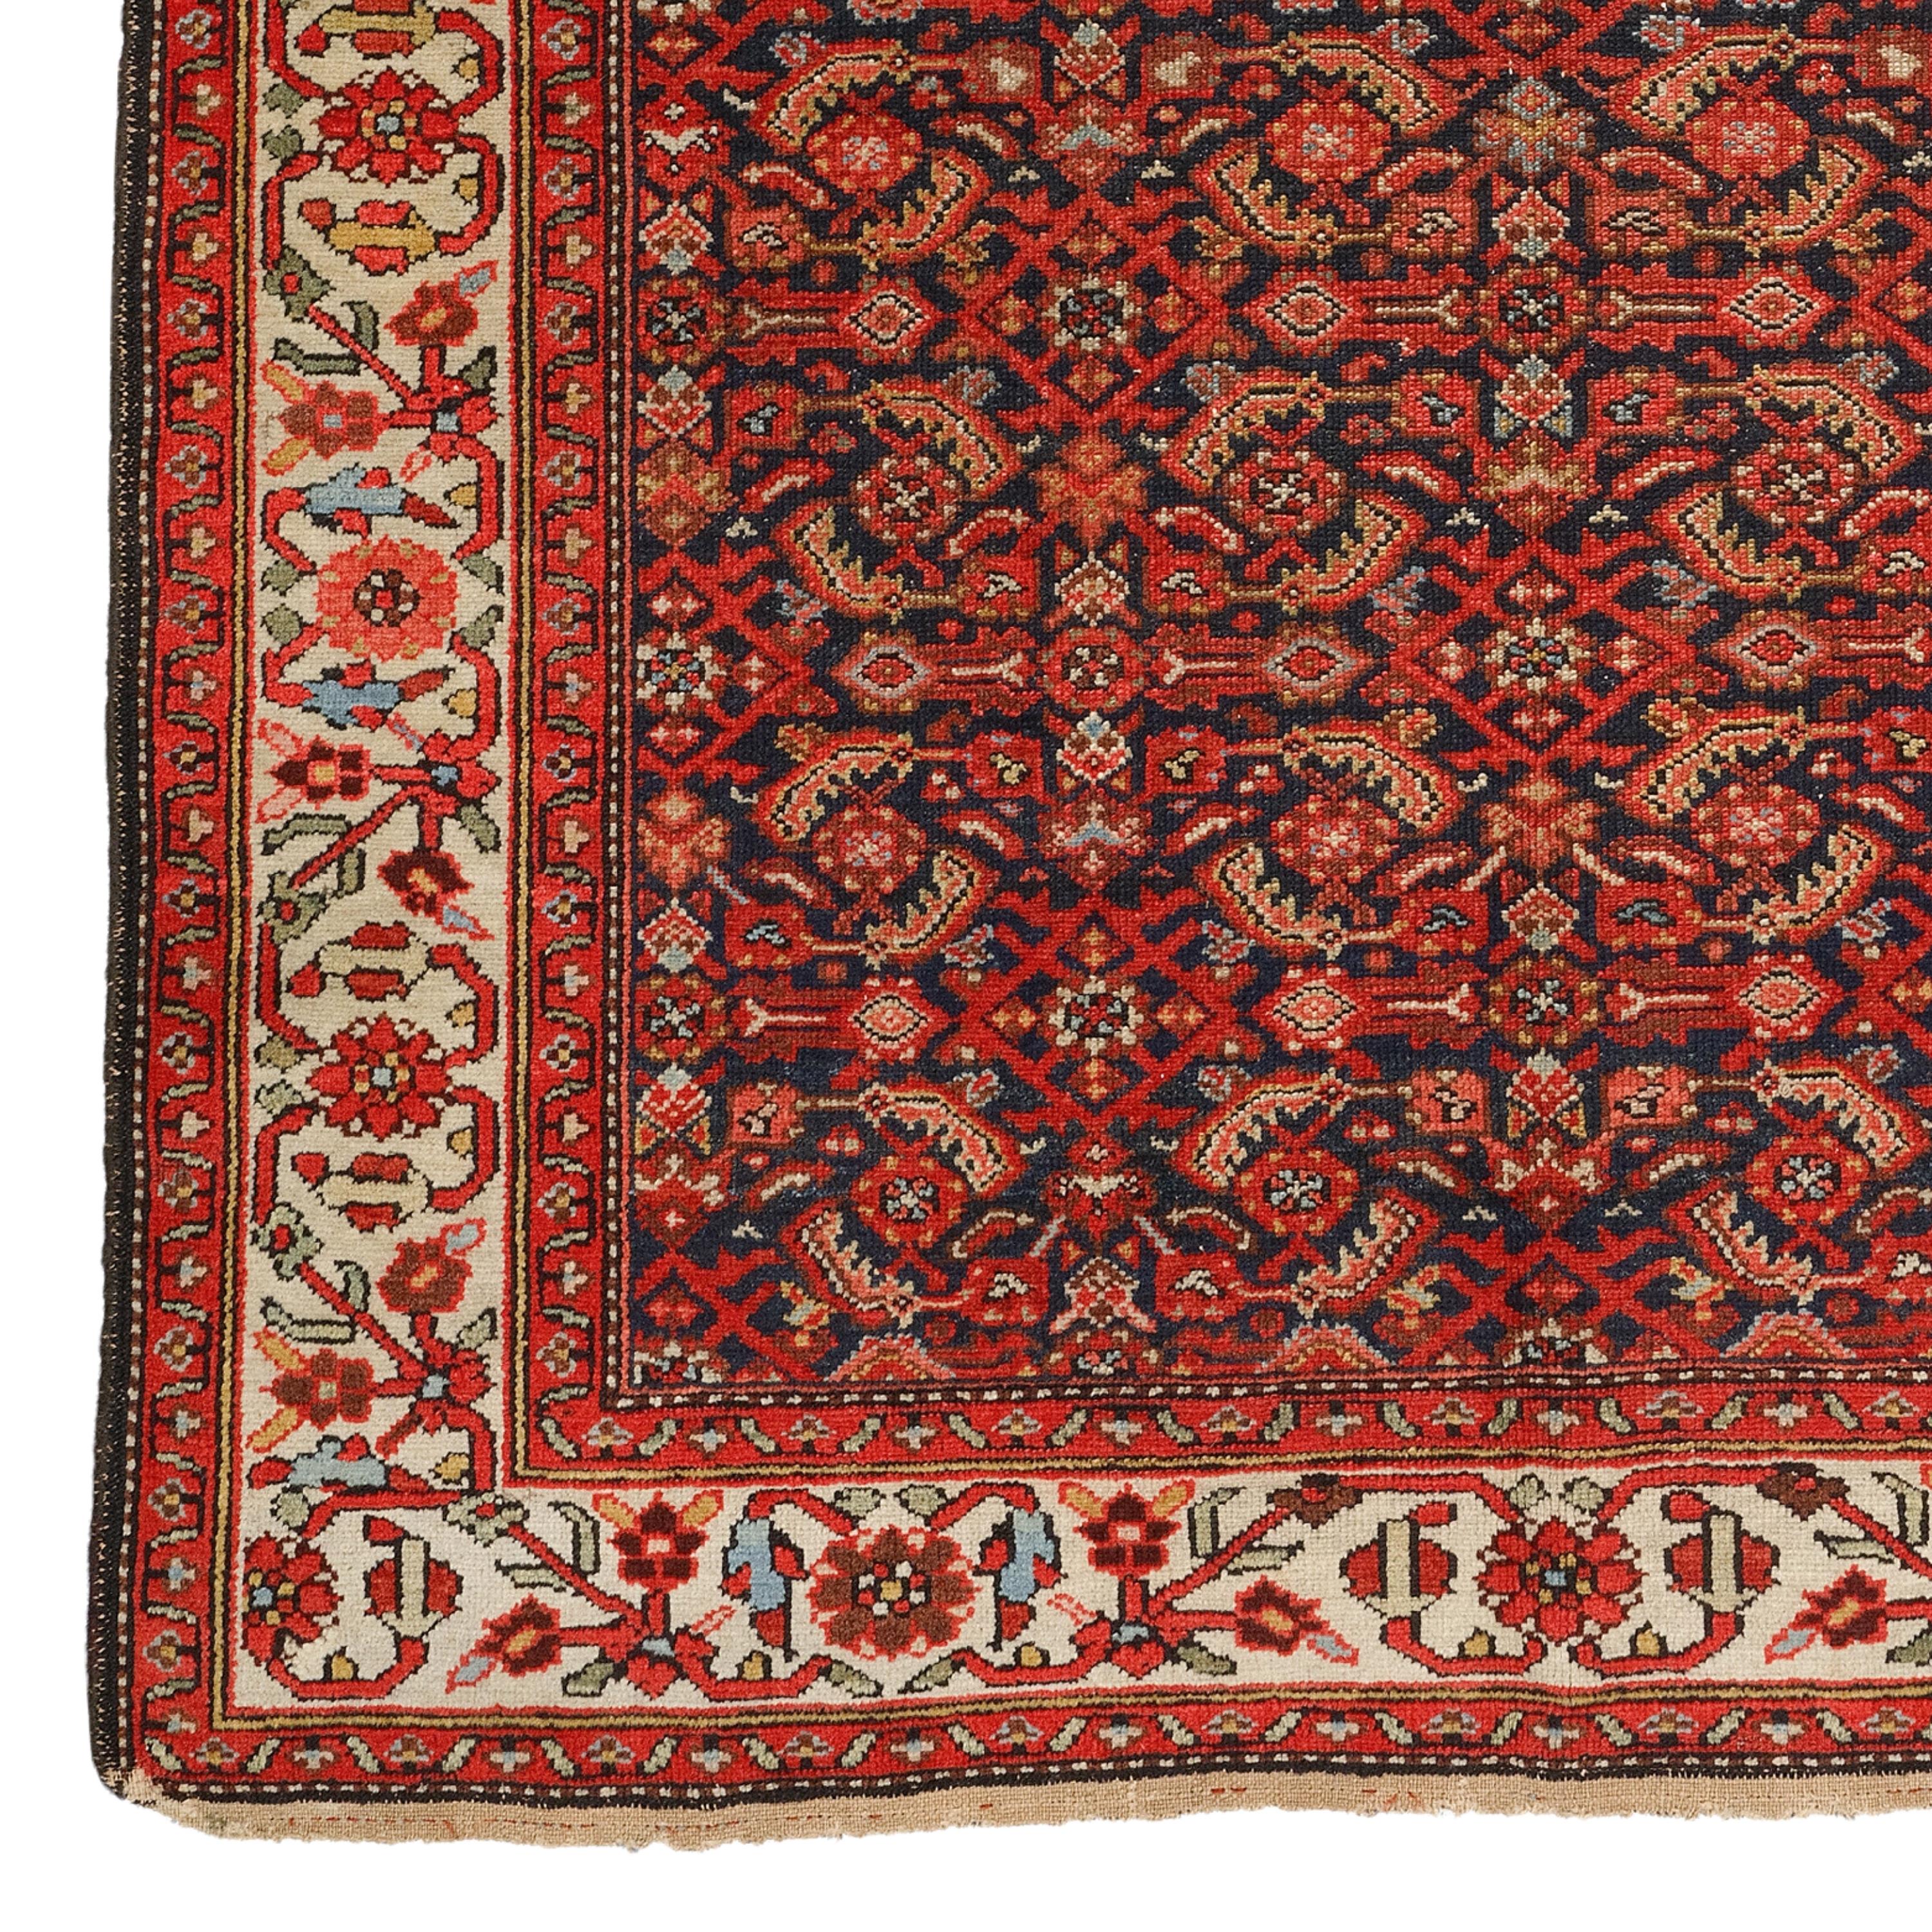 19th Century Melayer Rug

This extraordinary carpet will fascinate you with its intricate designs and vibrant colors that reflect the rich history and craftsmanship of the period. Each stitch tells the story of skilled craftsmen who masterfully